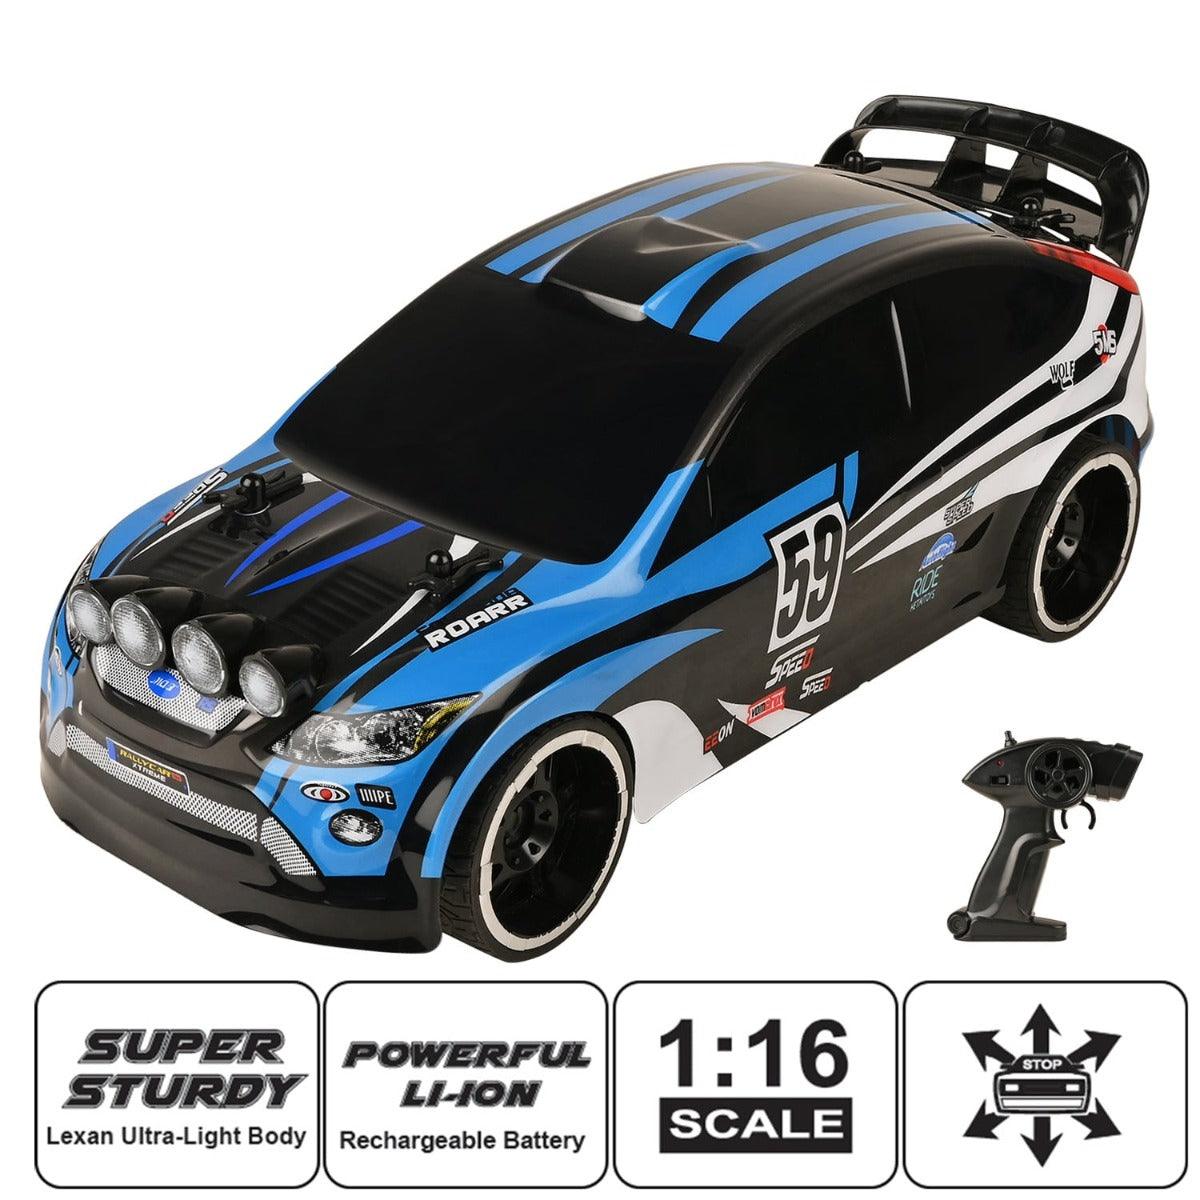 Playzu Rally Xtreme 1:16 Scale R/C Car - Blue for Ages 6+